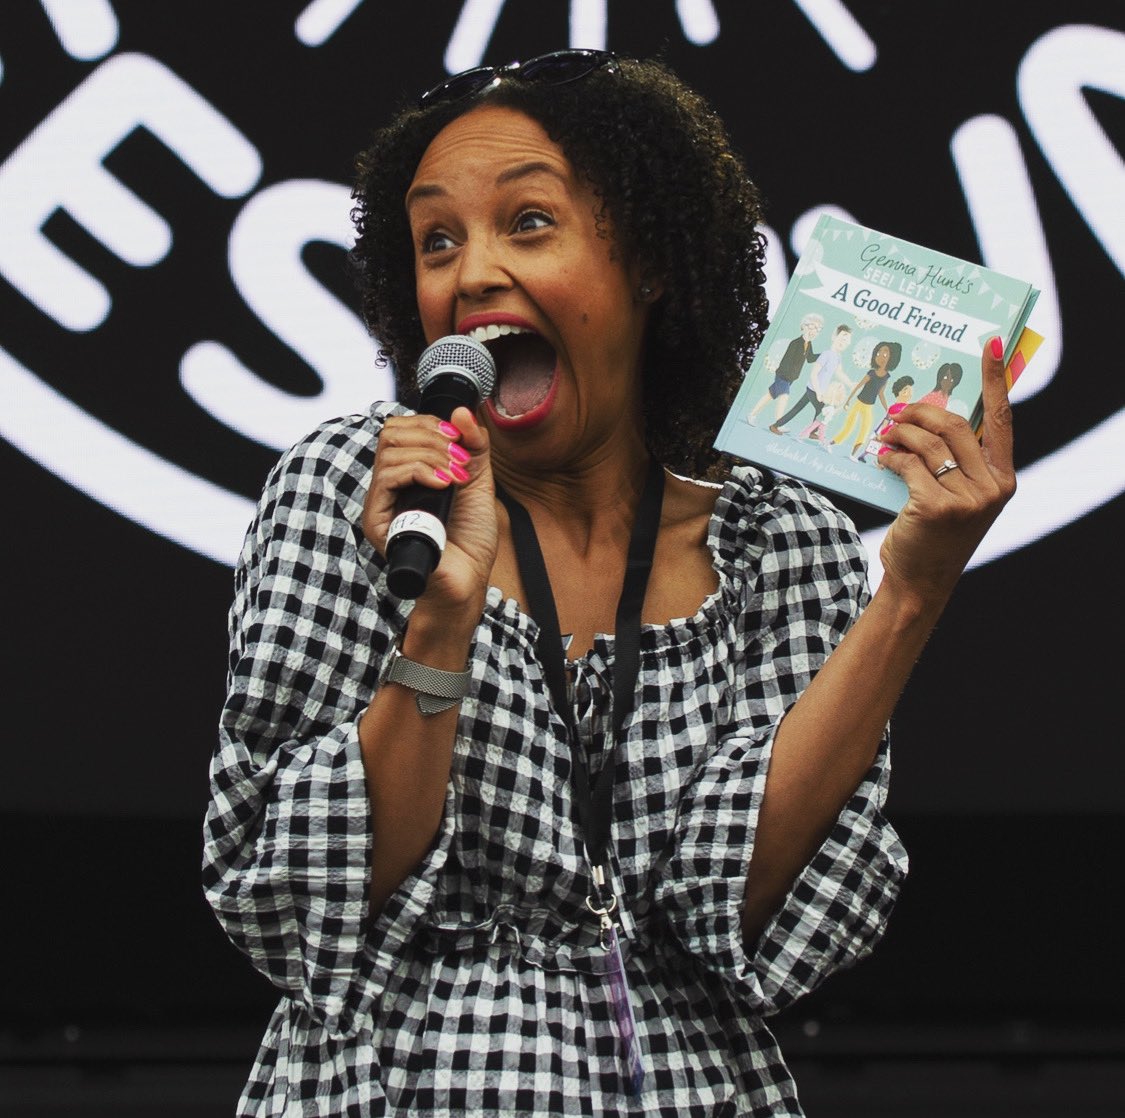 Still looking for the perfect present? This will be YOUR face too, when you get my first children’s book for the little people in your life this Christmas. Available from @SPCKPublishing and other online book shops. Get it under the tree in time for Jesus’s birthday 🎄🎁 #joy